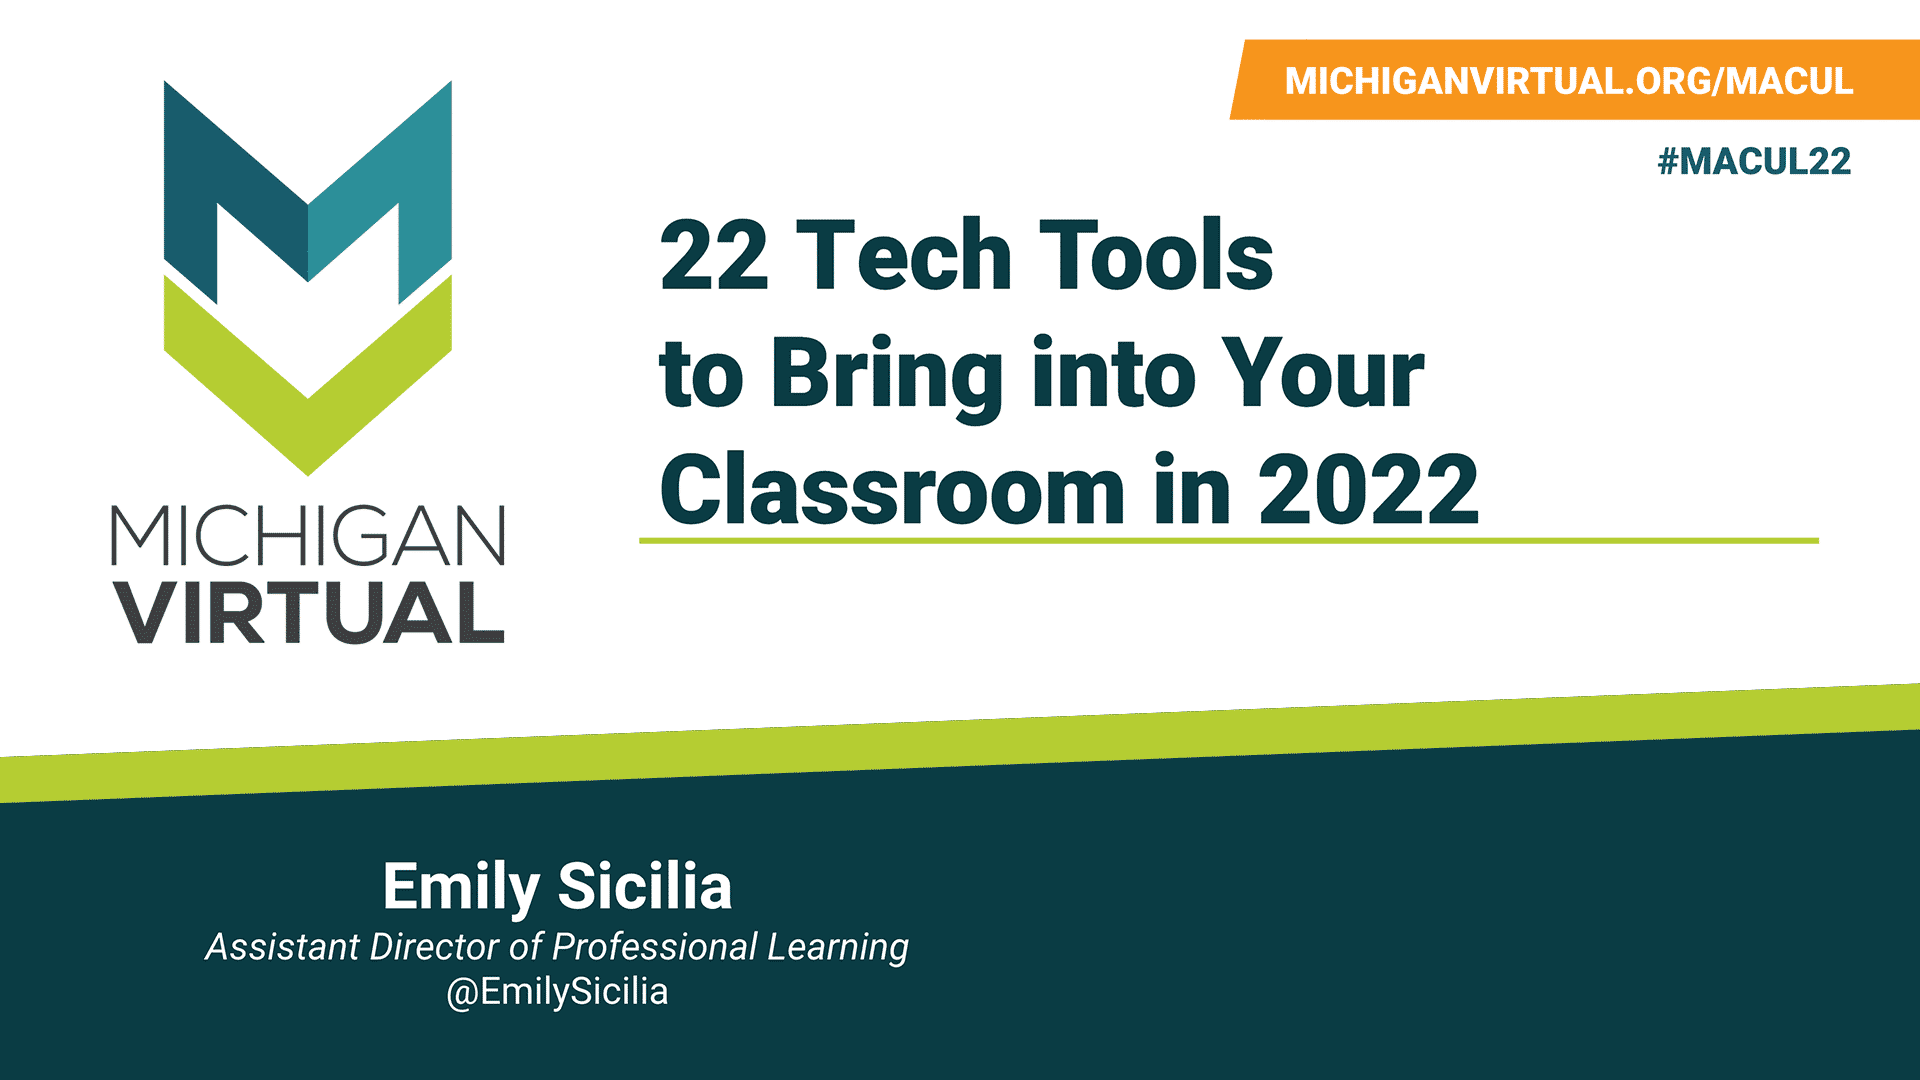 22 Tech Tools to Bring Into Your Classroom in 2022. Emily Sicilia